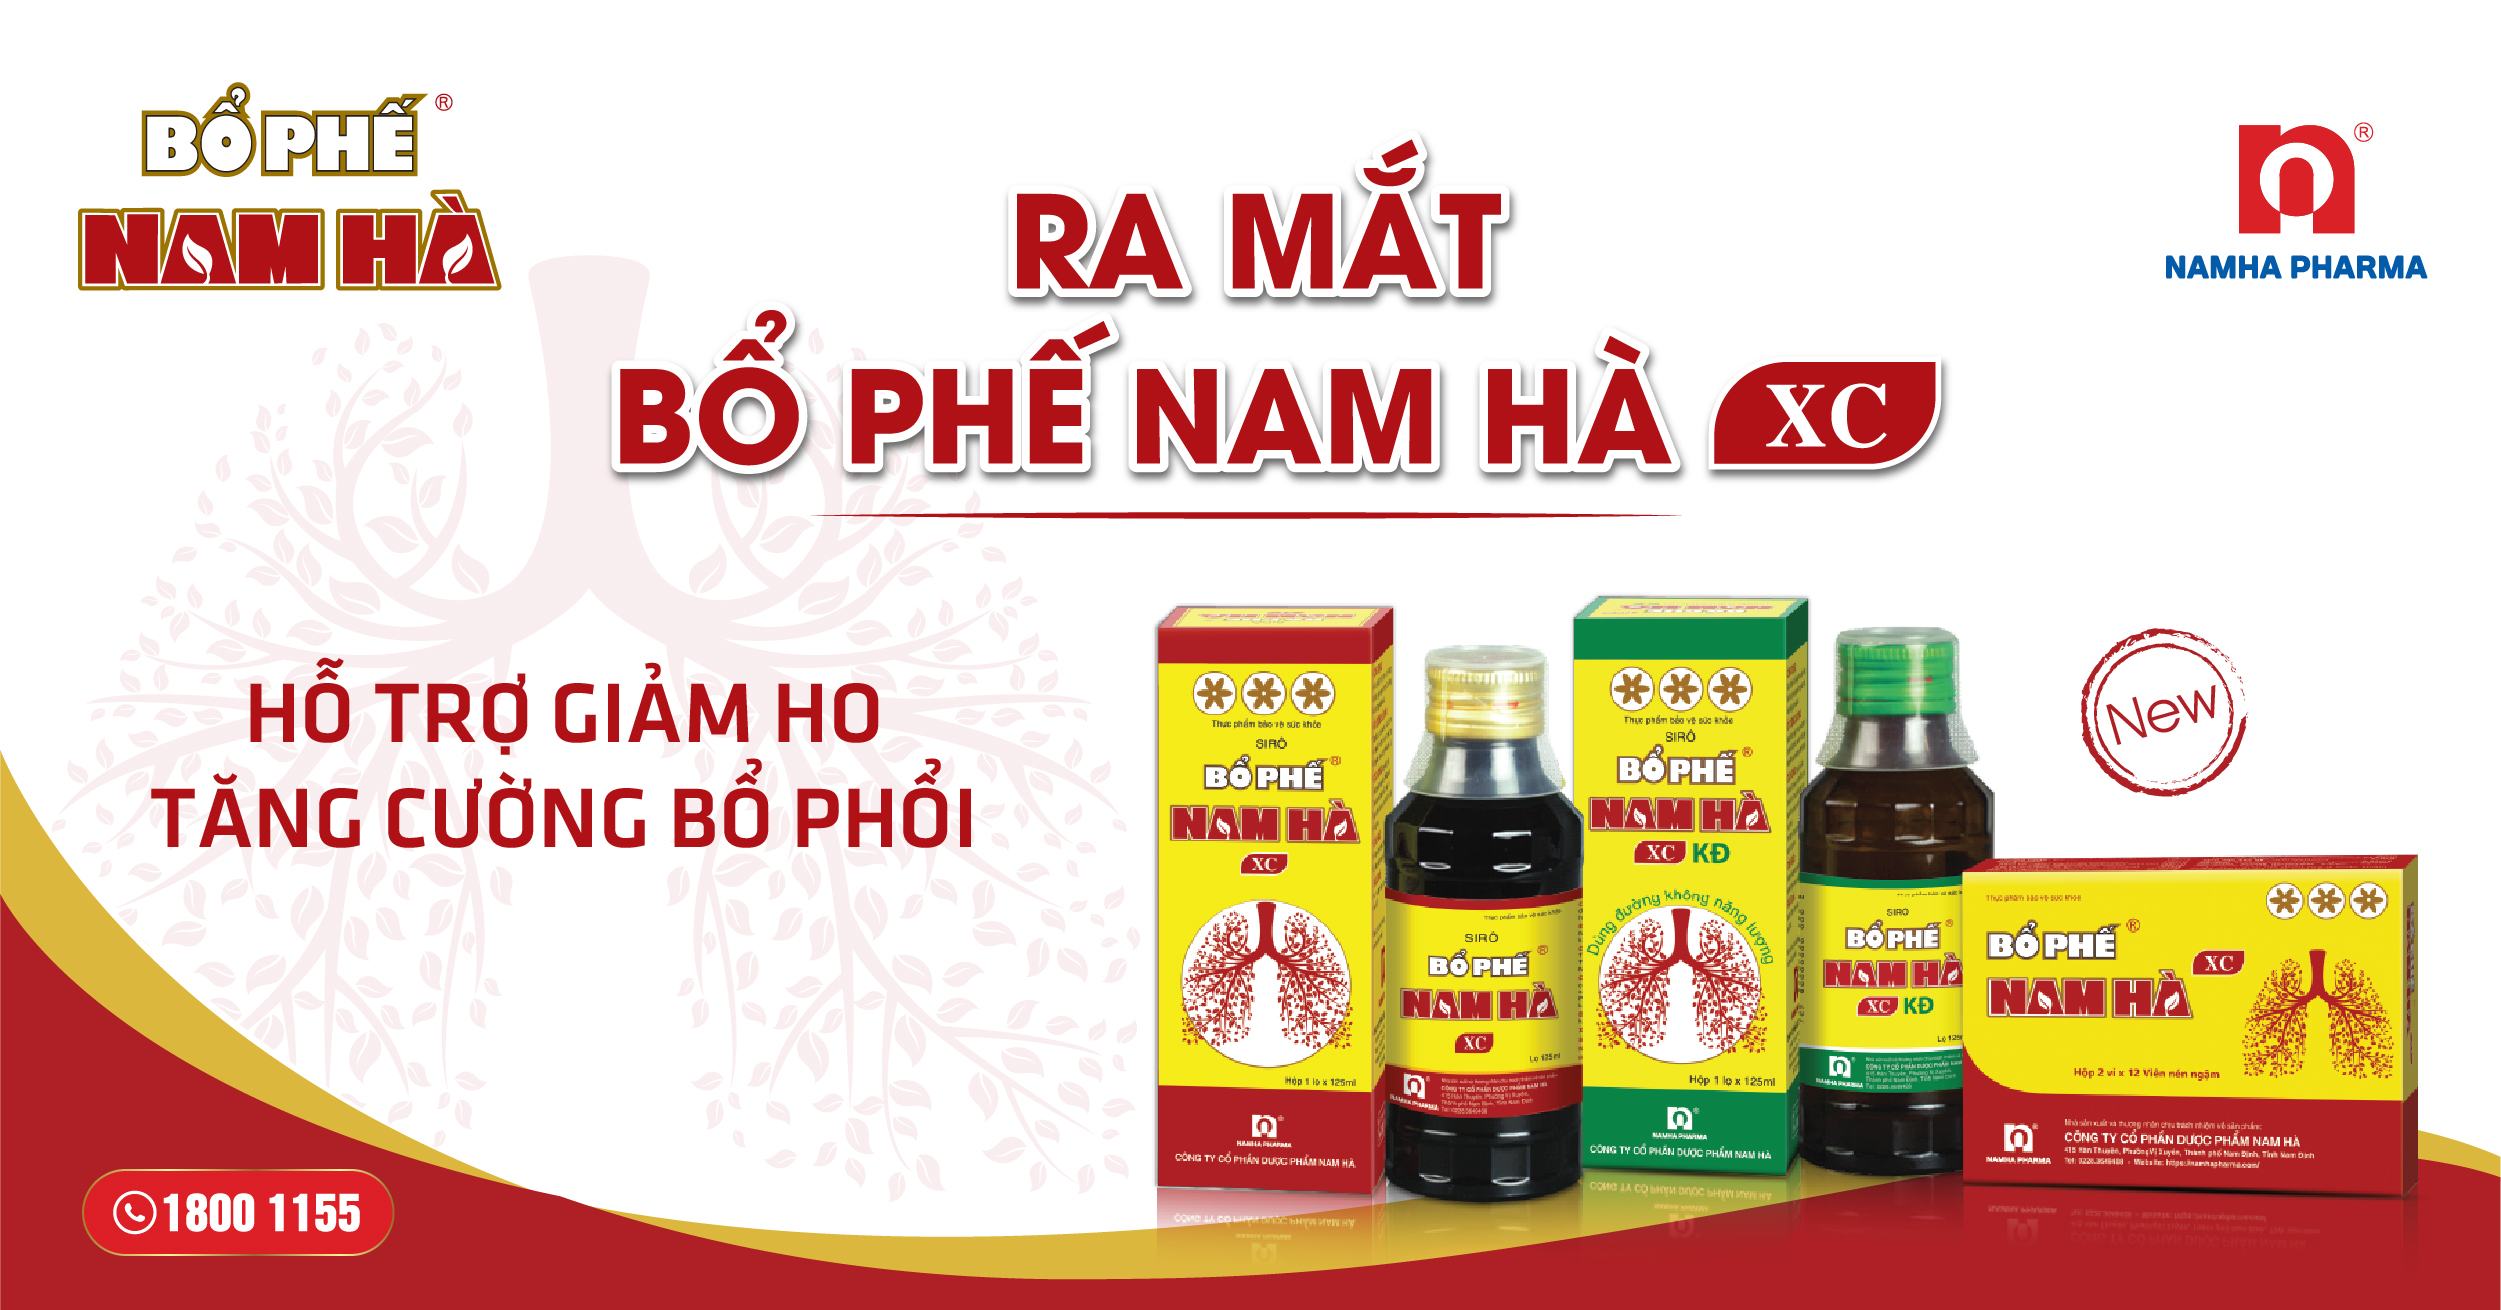 OFFER A SET OF 3 PRODUCTS OF NAM HA XC SUPPORT TO REDUCE Cough, Enhancing Spectrum